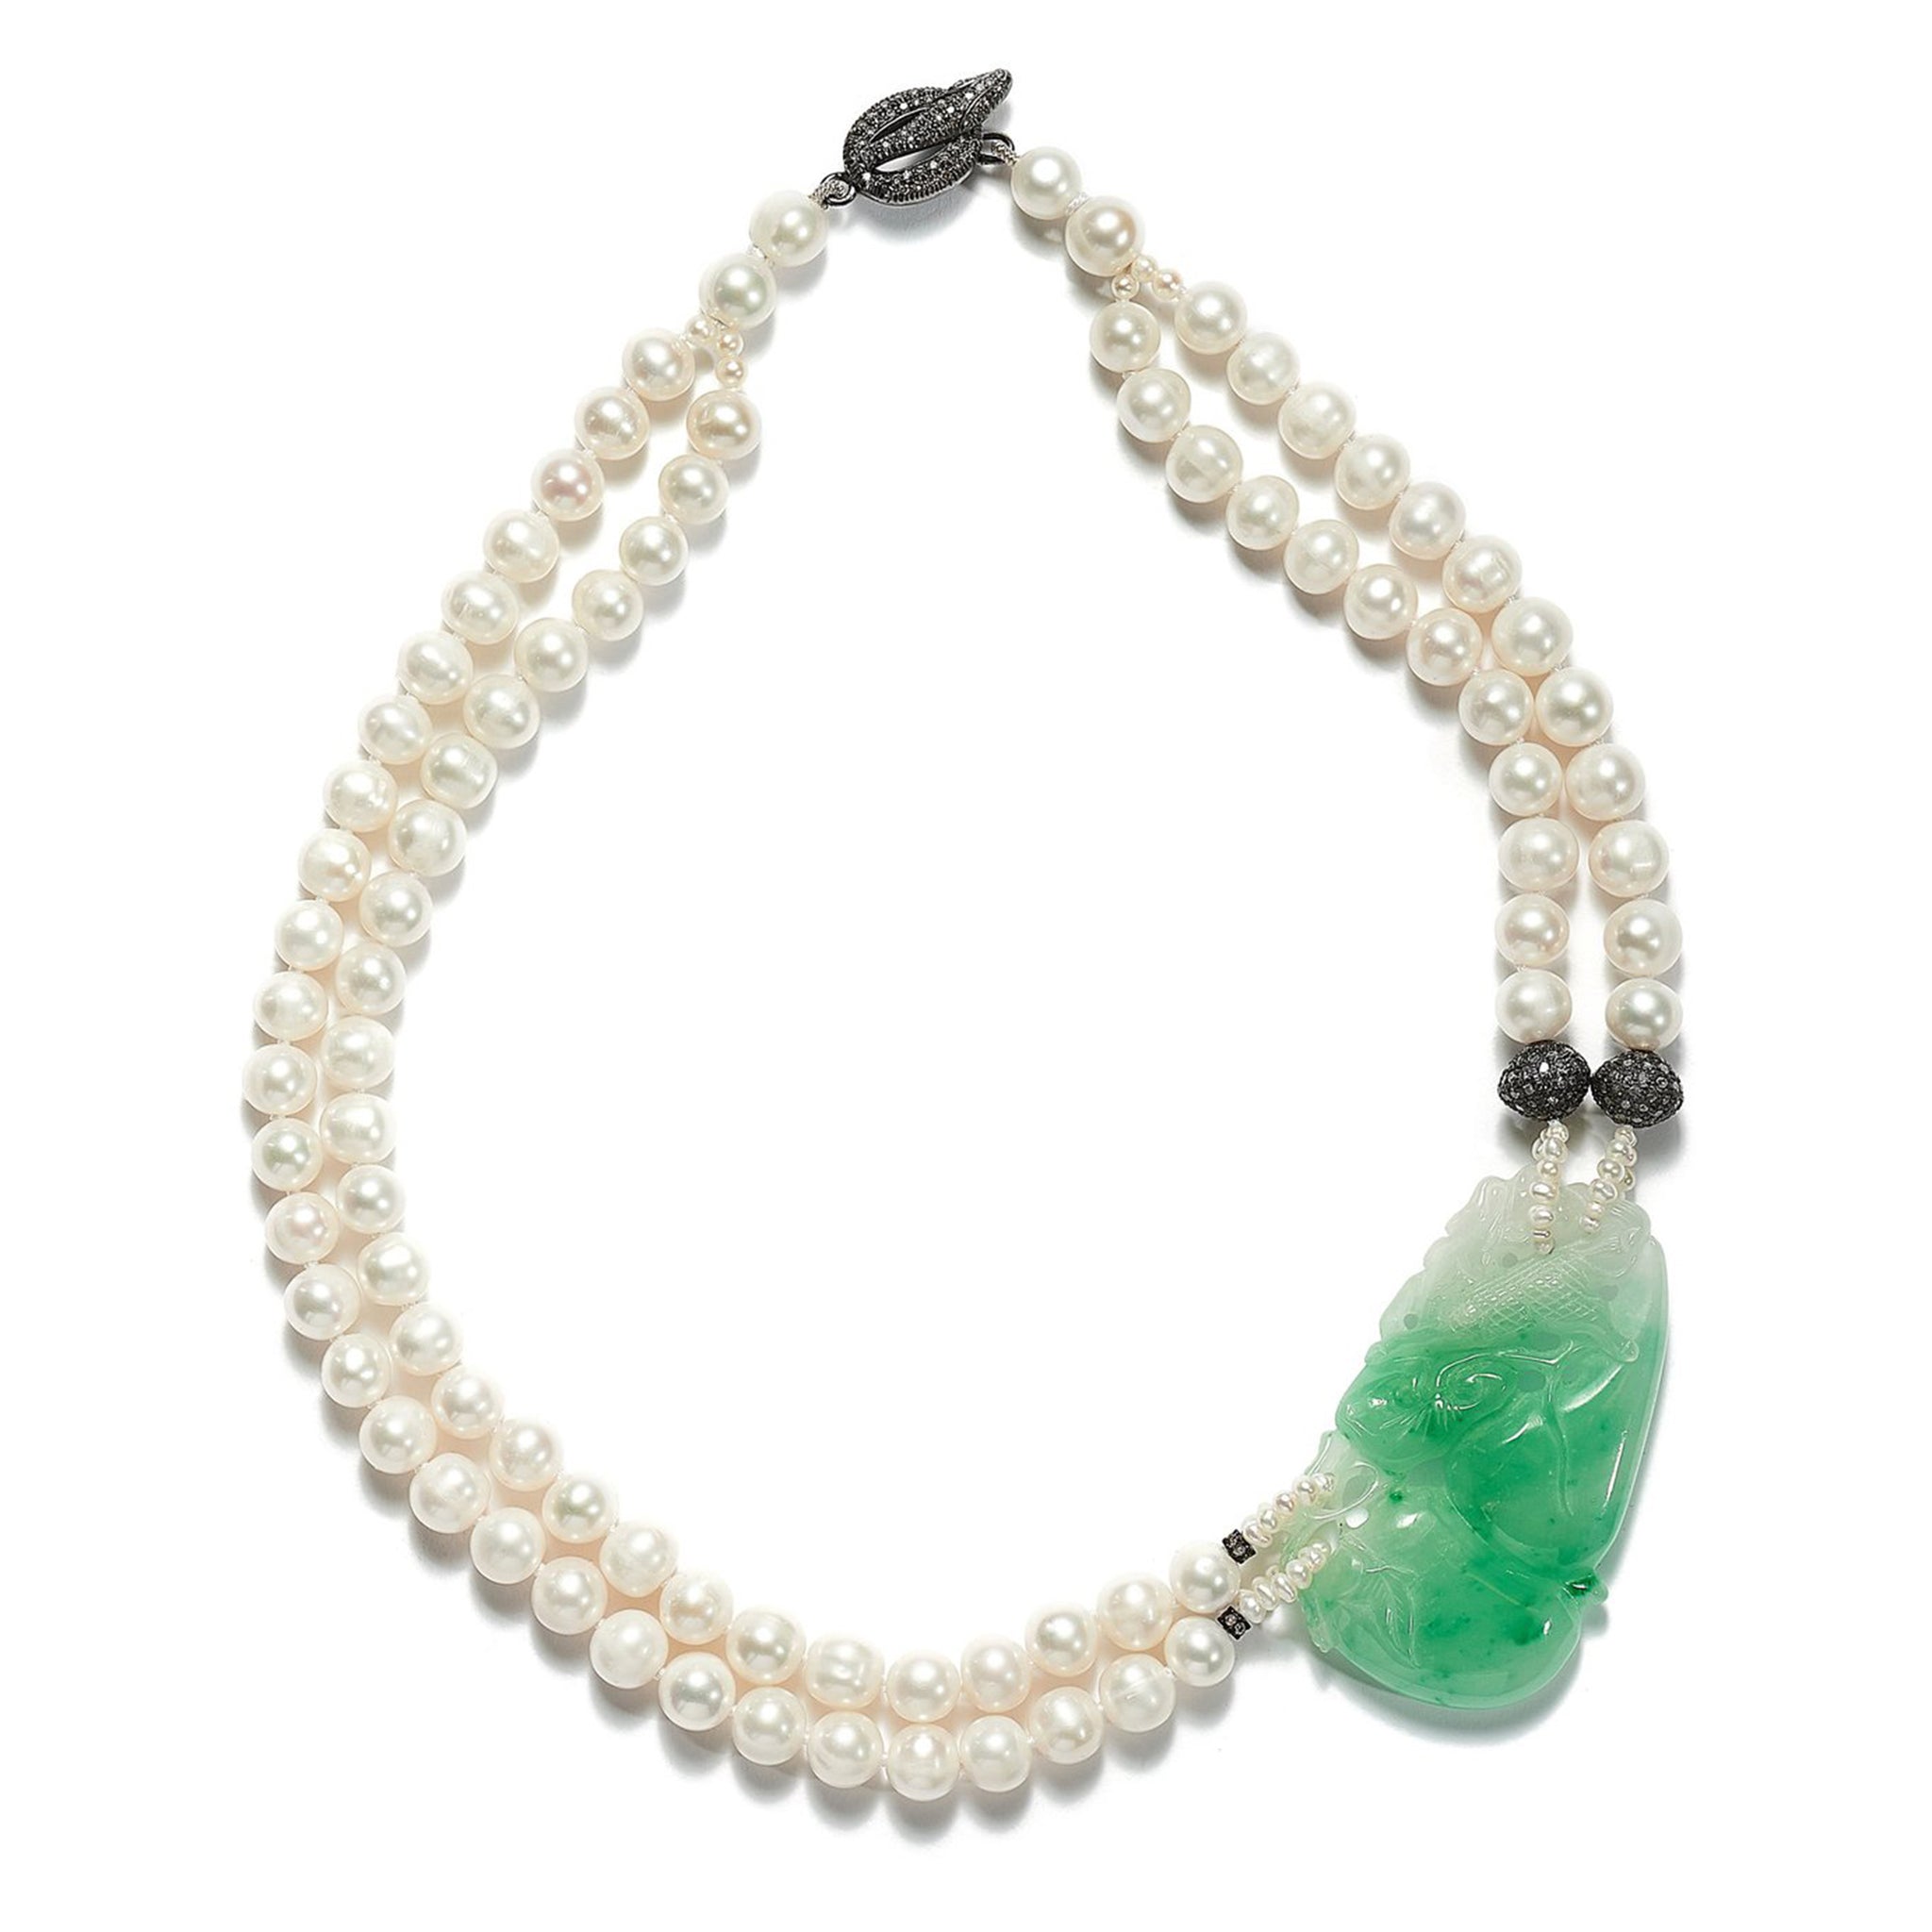 Pearl and Jade Harmony Necklace